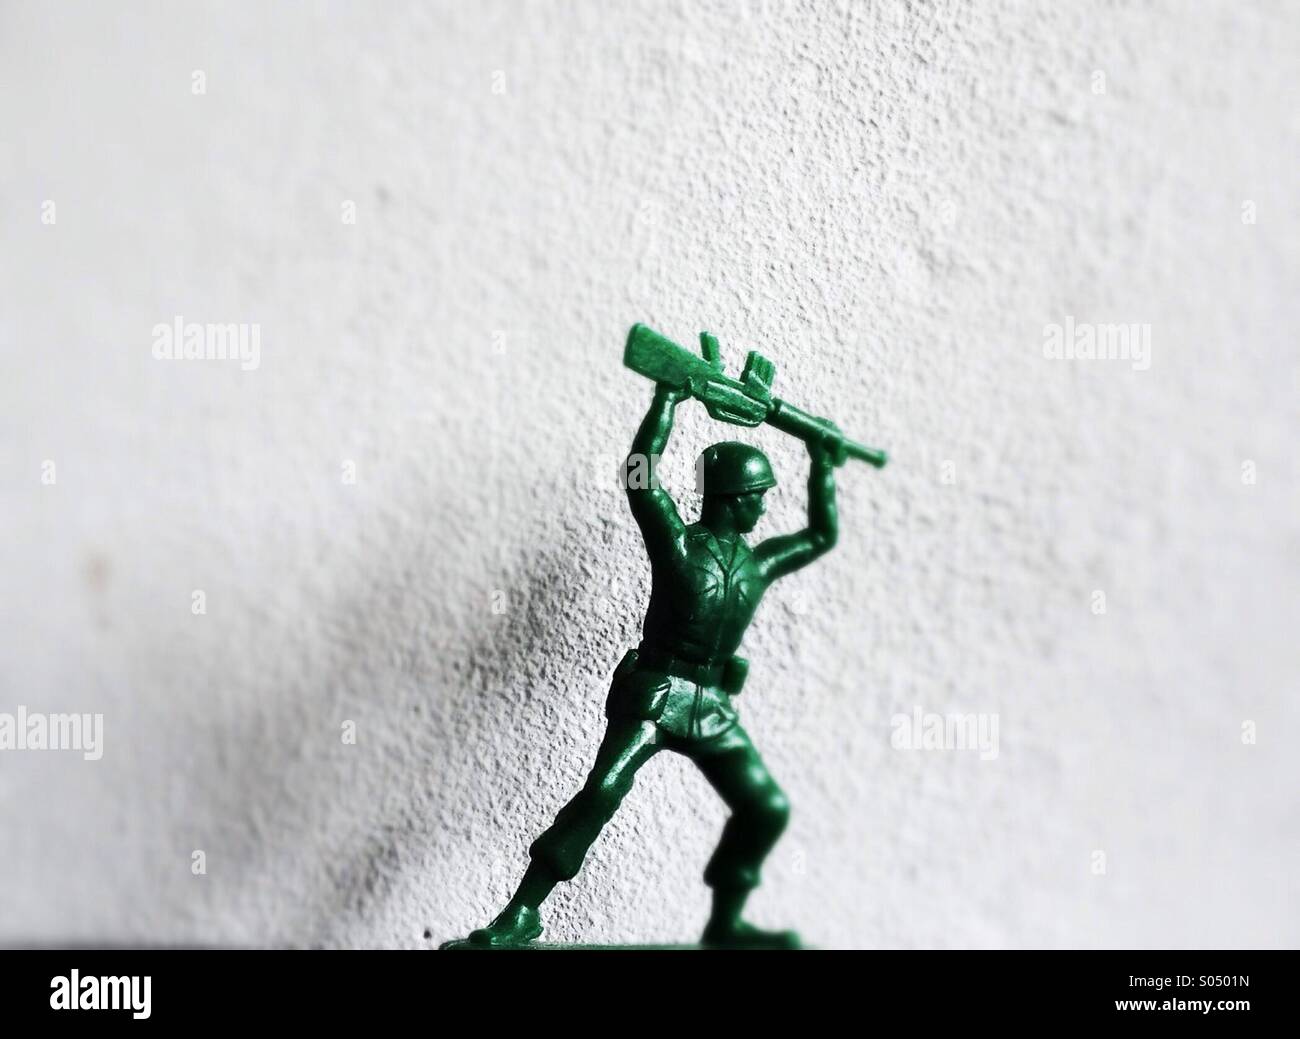 Plastic green toy soldier Stock Photo